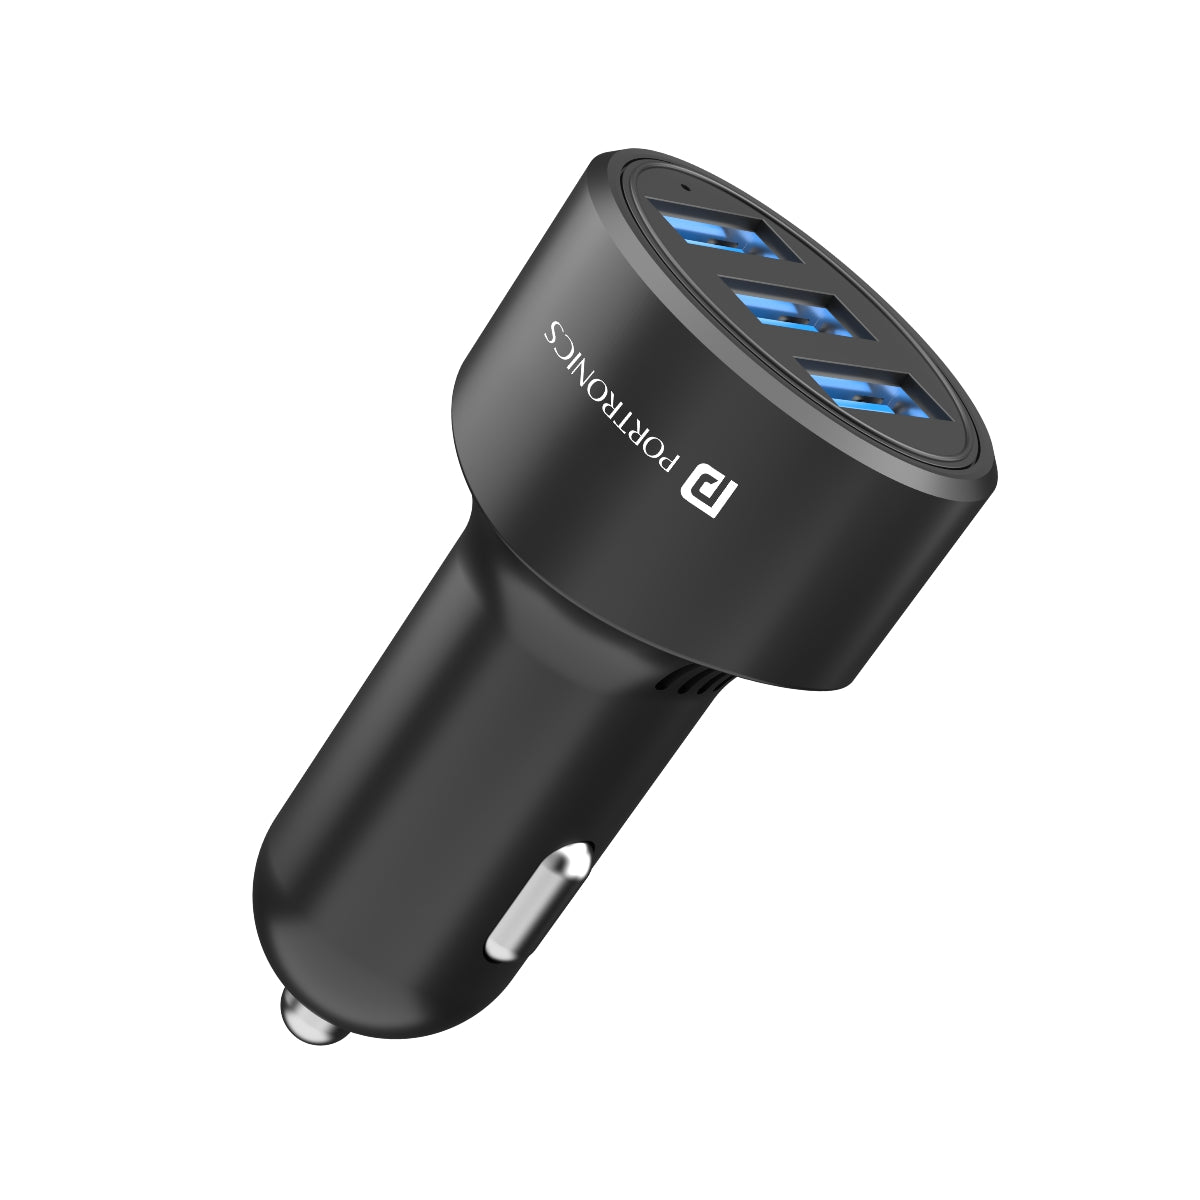 Buy Portronics Car Power 12 car USB charger with 3 USB ports